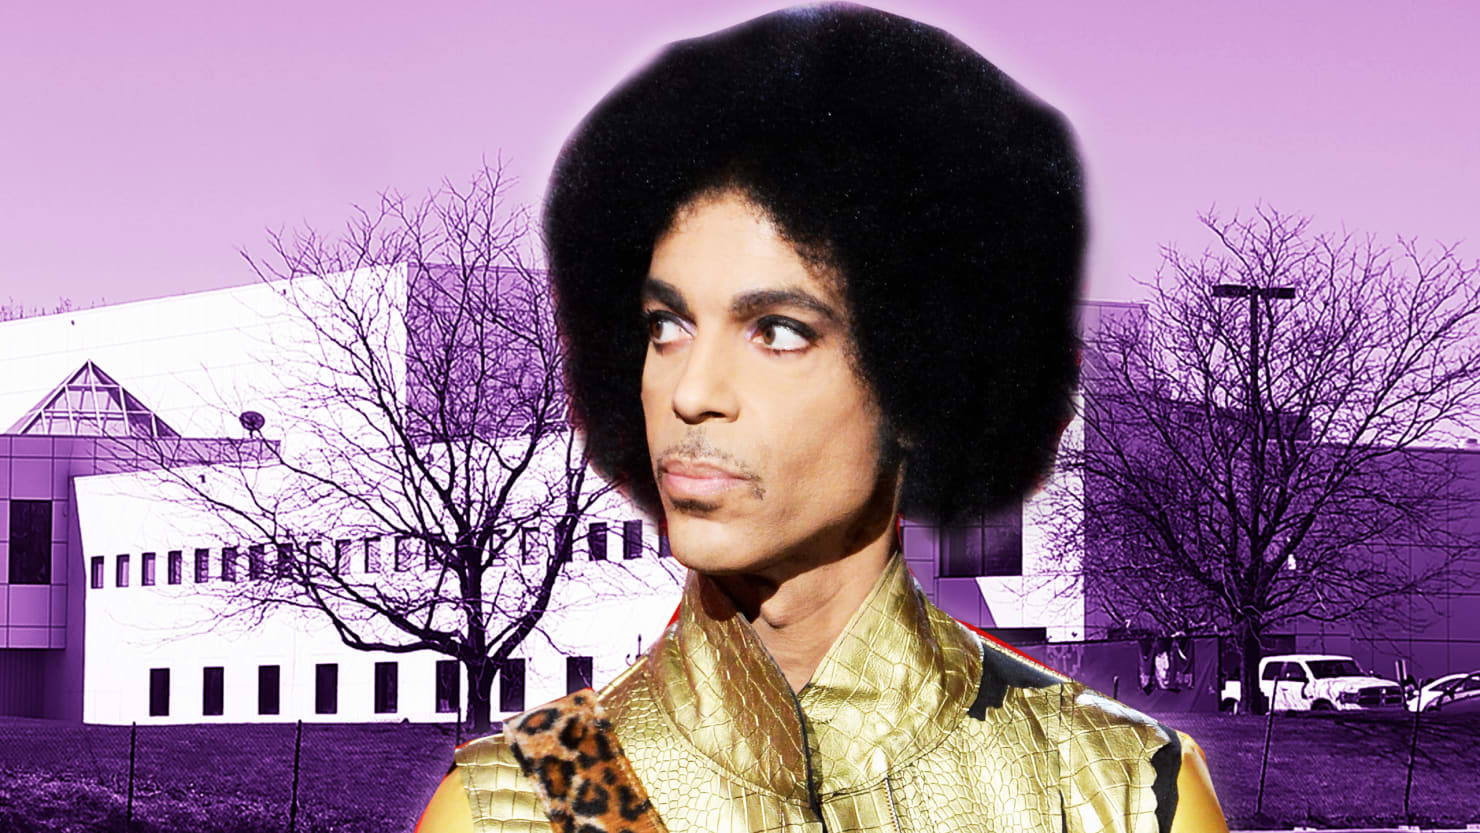 Princes Identity Has Been Stripped From Paisley Park 